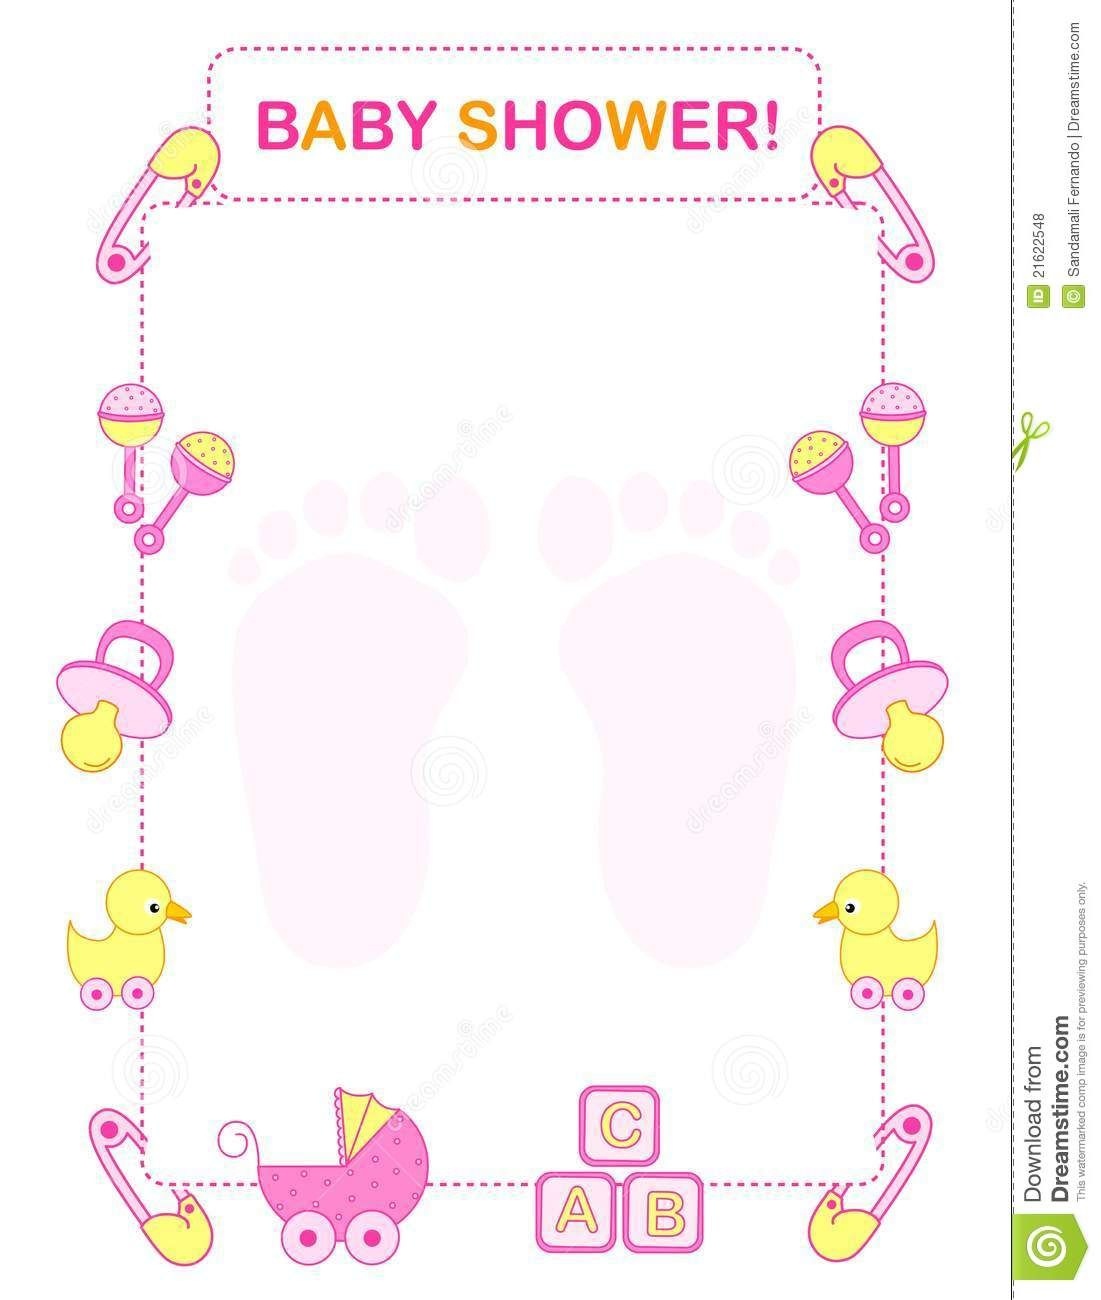 Free Printable Baby Shower Clip Art (59 ) | Baby Shower In 2019 - Free Printable Baby Shower Clip Art